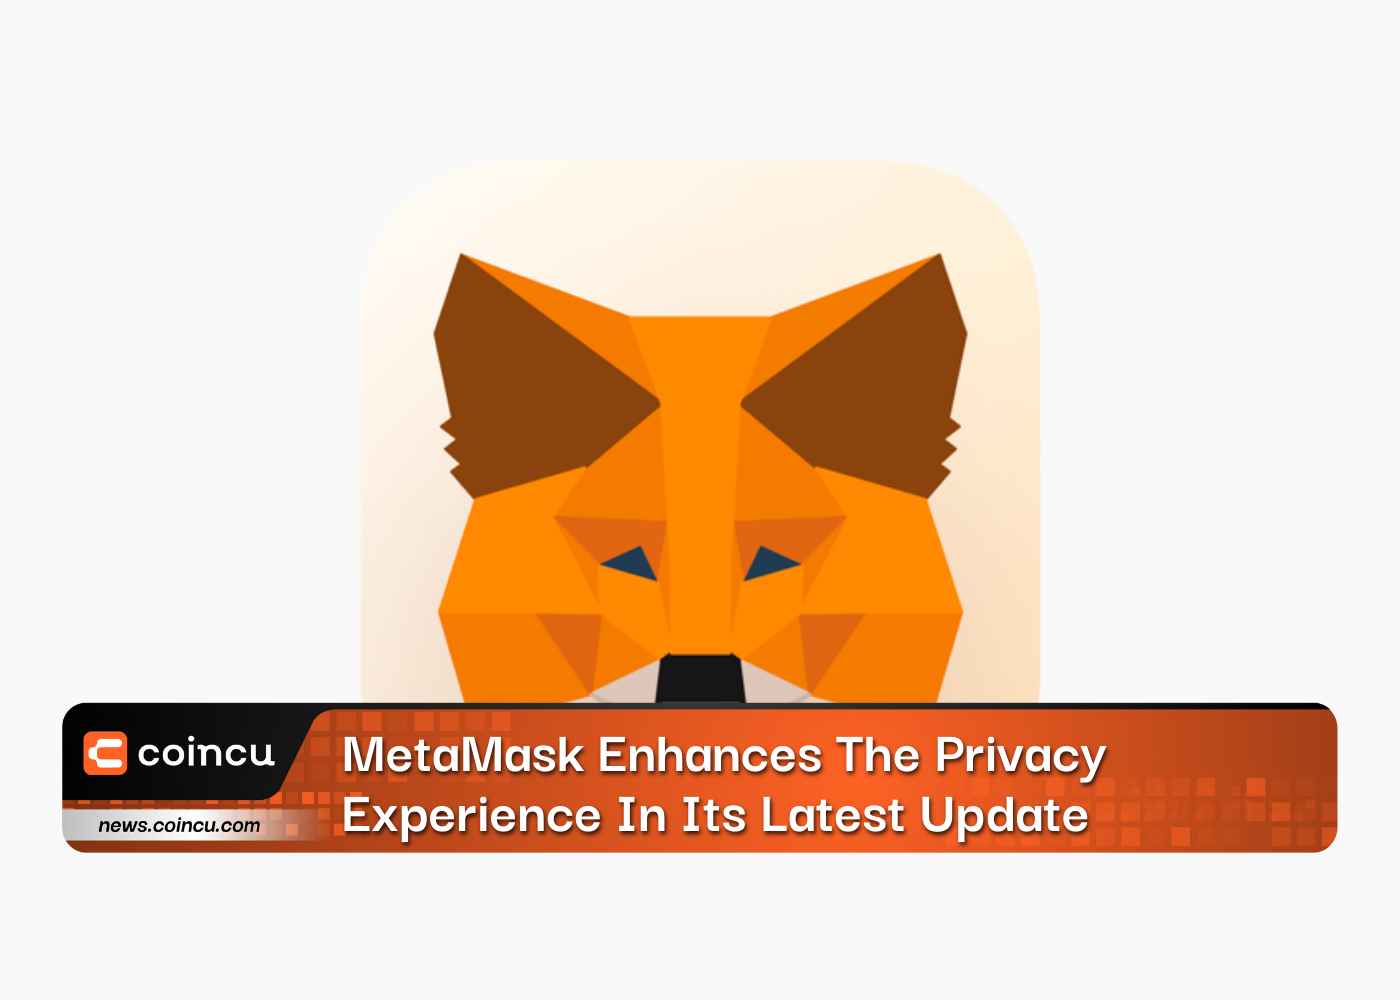 MetaMask Enhances The Privacy Experience In Its Latest Update